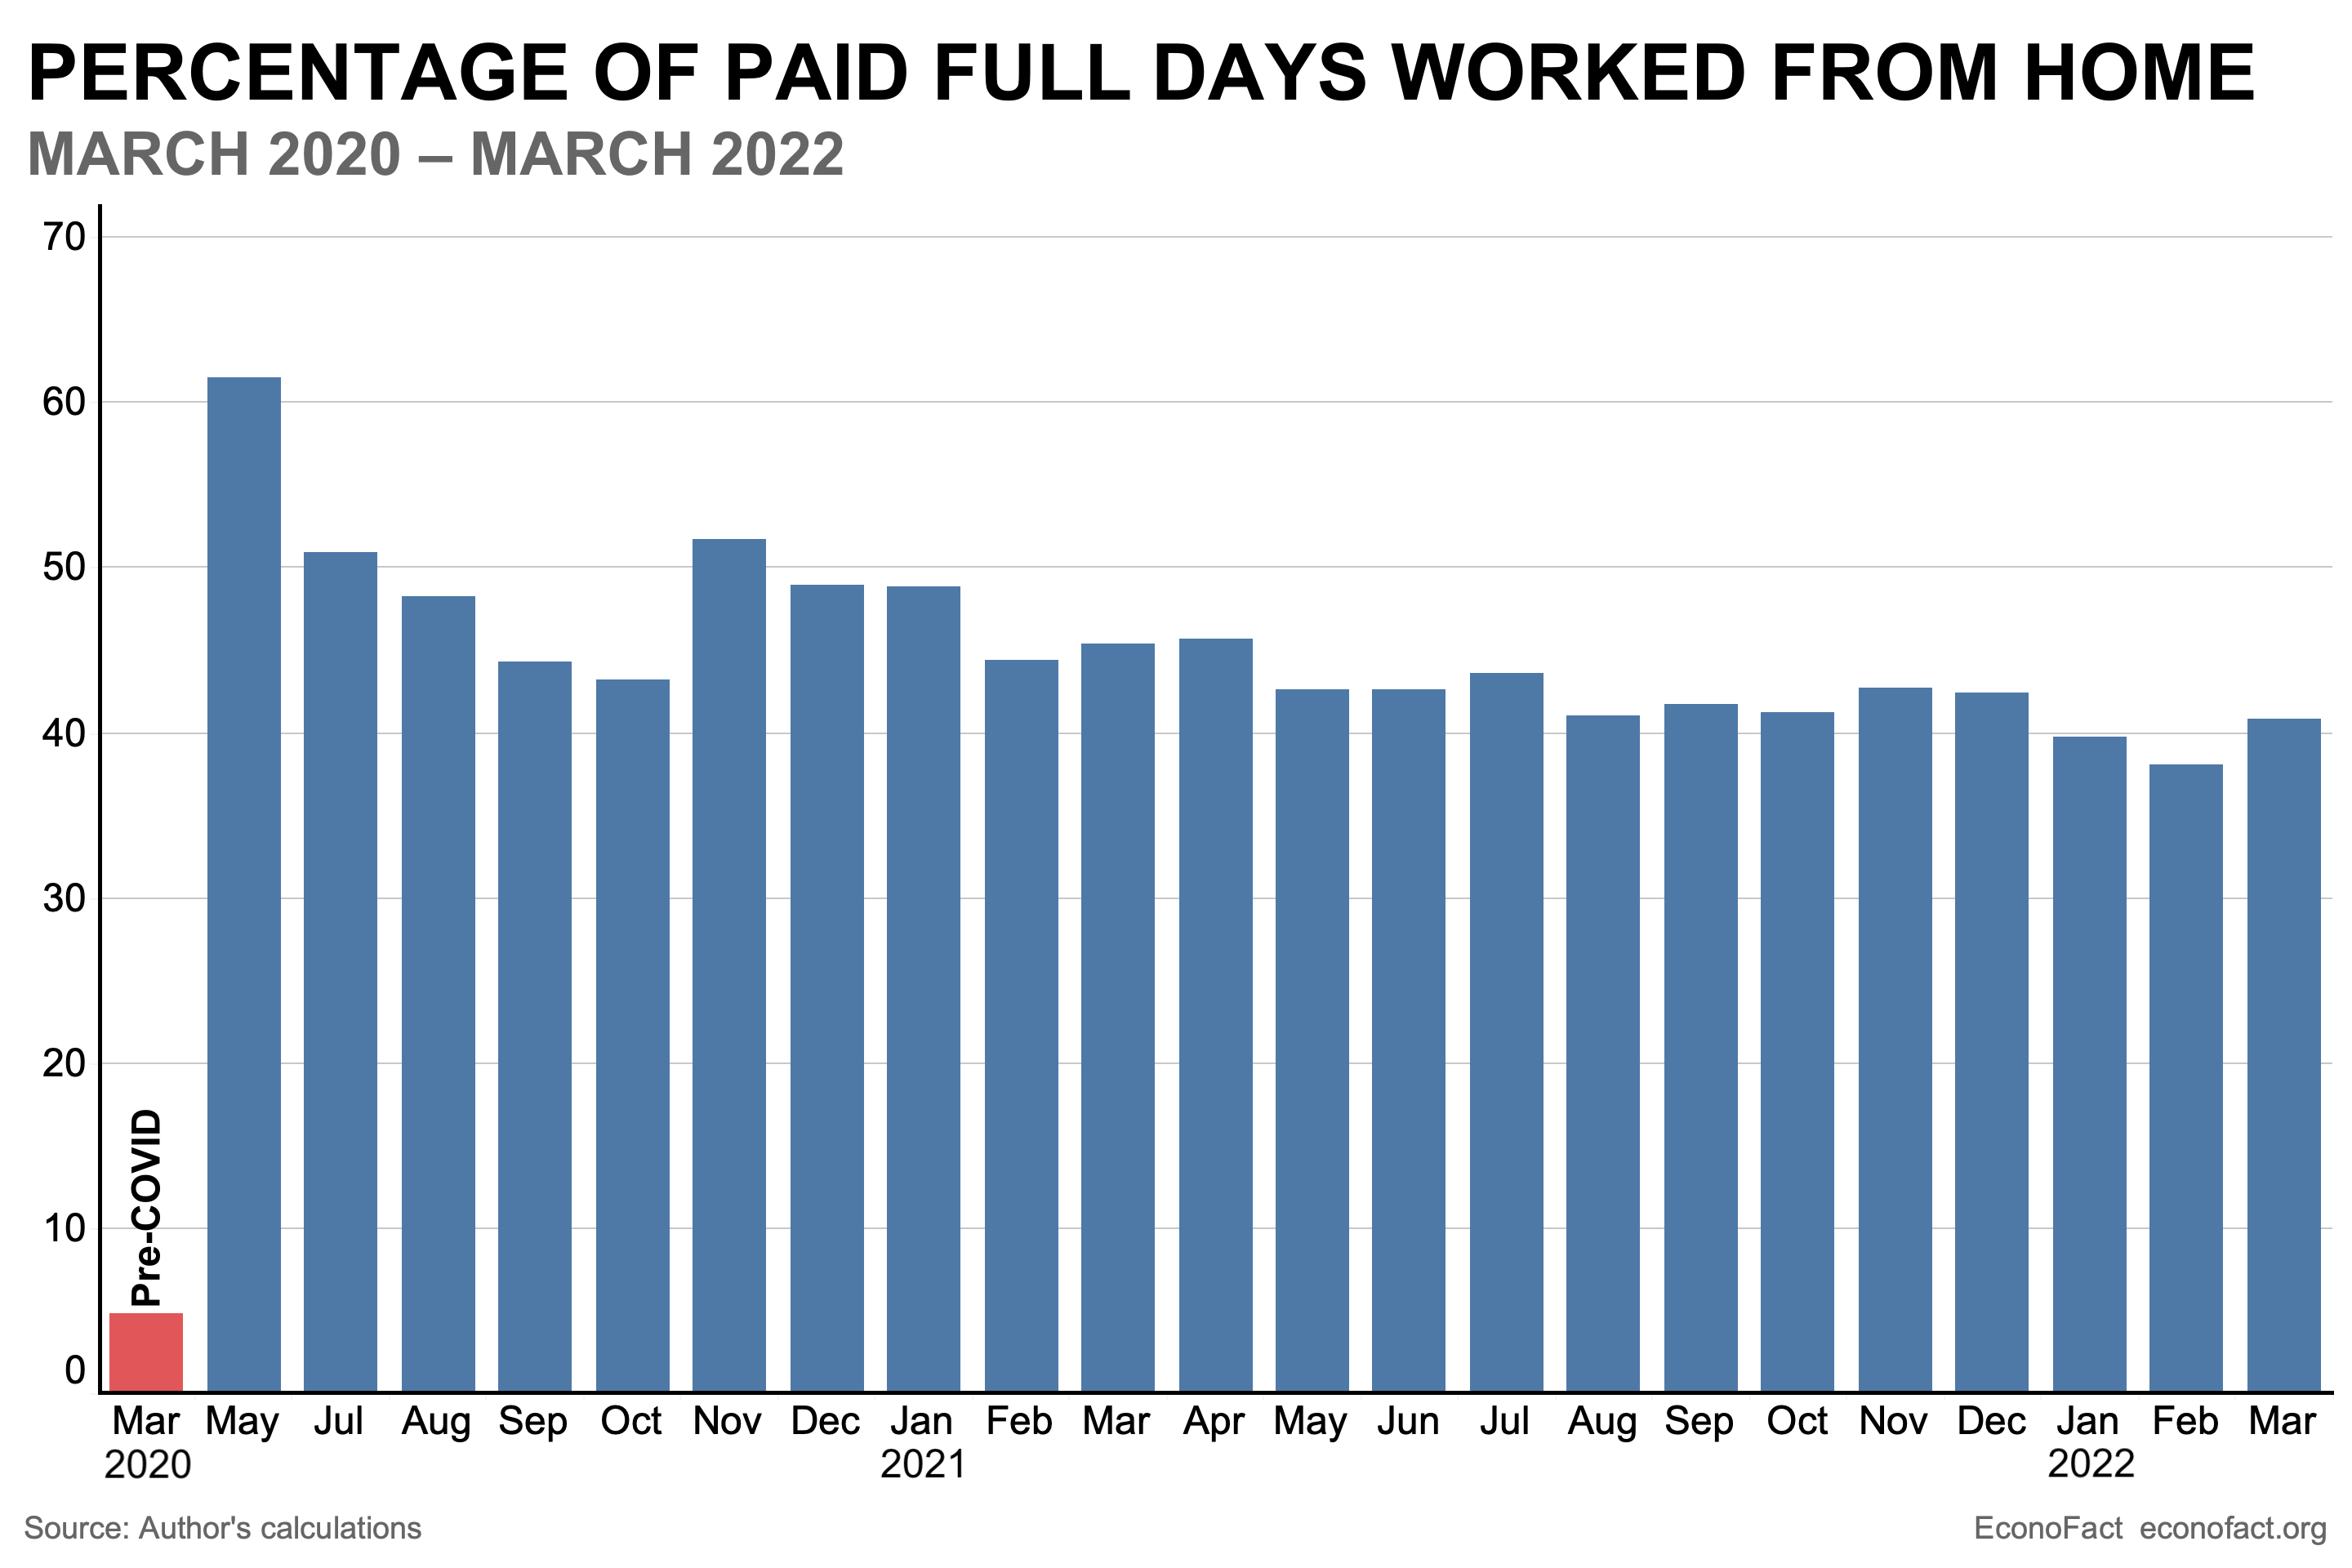 Percentage of Paid Full Days Worked From Home, March 2020 to March 2022. In March 2020, before COVID-19 lockdowns began, about 4.8% of paid full days were worked from home. By May it was over 60%, and remained between 40% and 50% until 2022, which has seen just under 40% of paid full days worked from home.